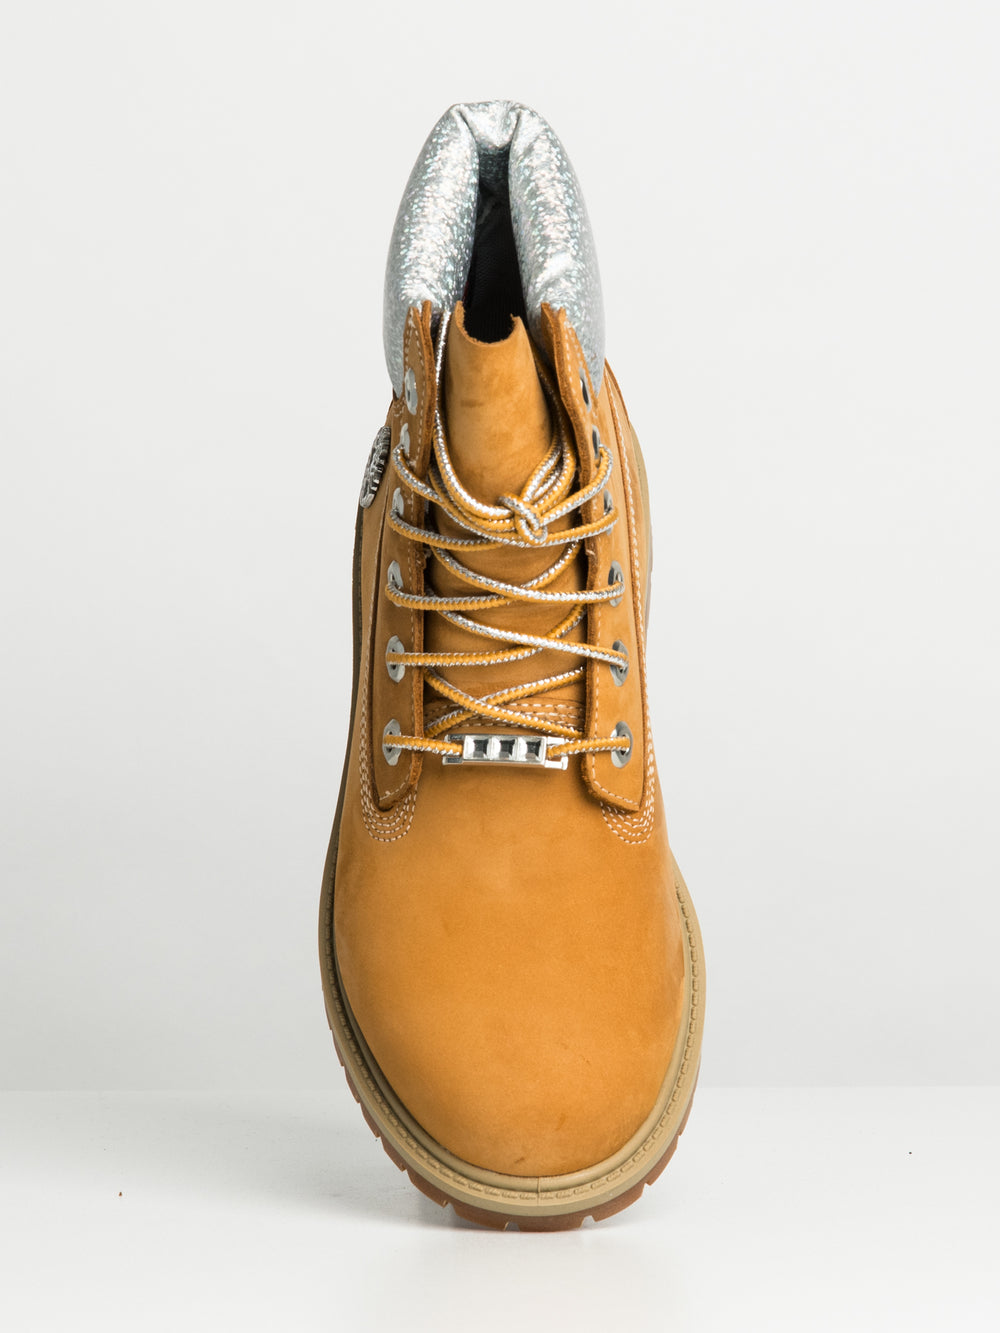 WOMENS TIMBERLAND 6" HERITAGE CUPSOLE BOOT - CLEARANCE